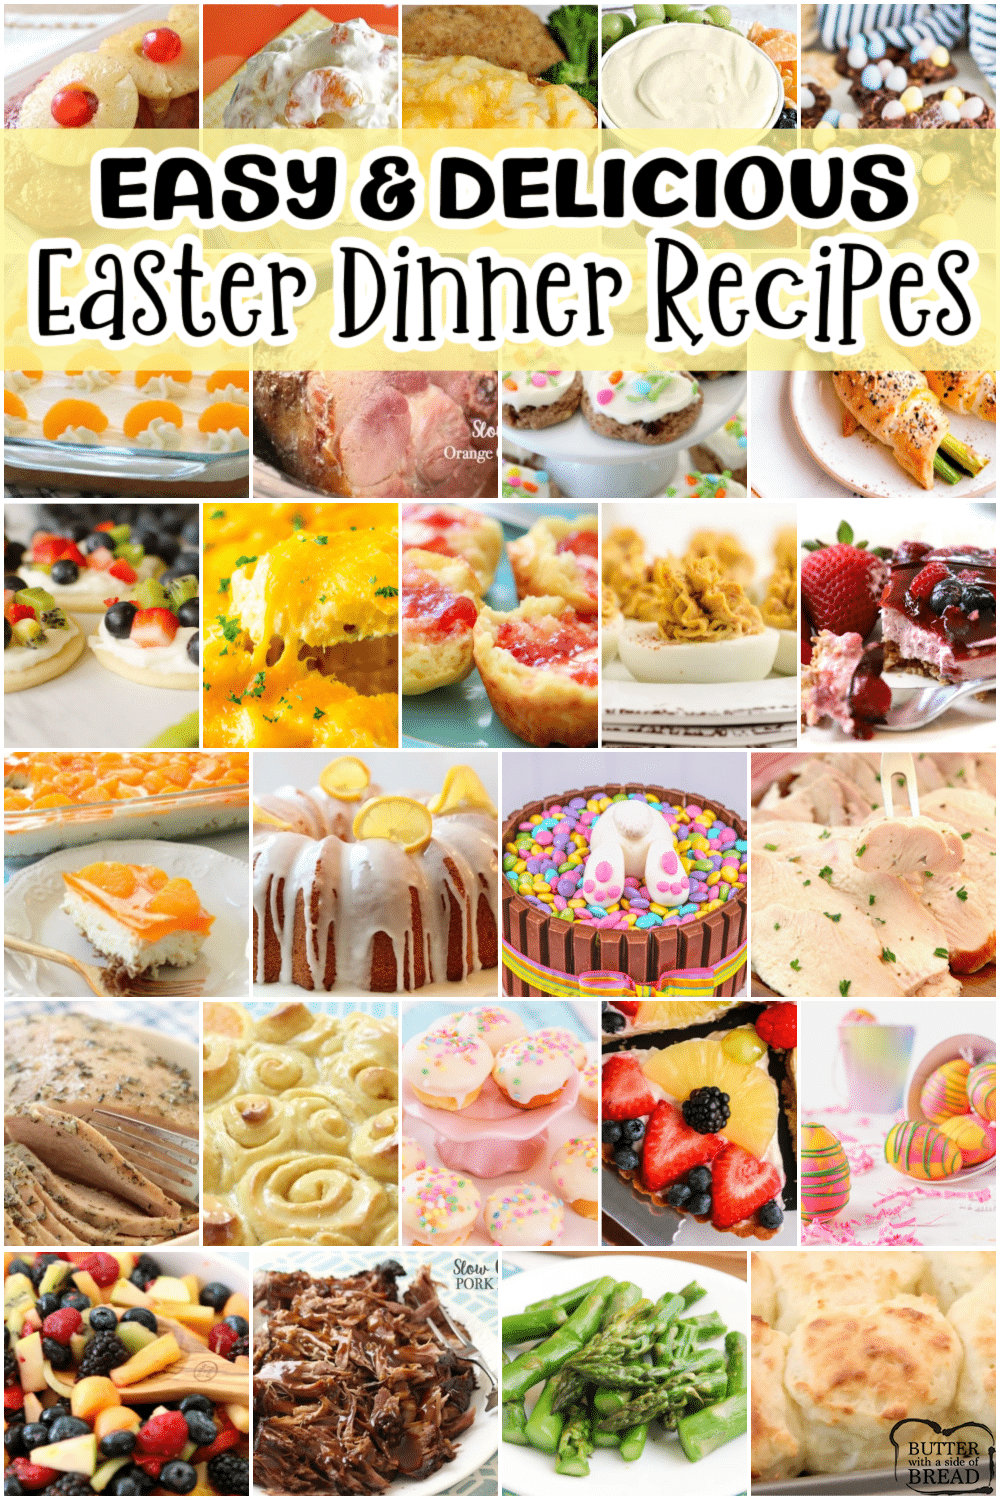 EASY & DELICIOUS EASTER DINNER RECIPES